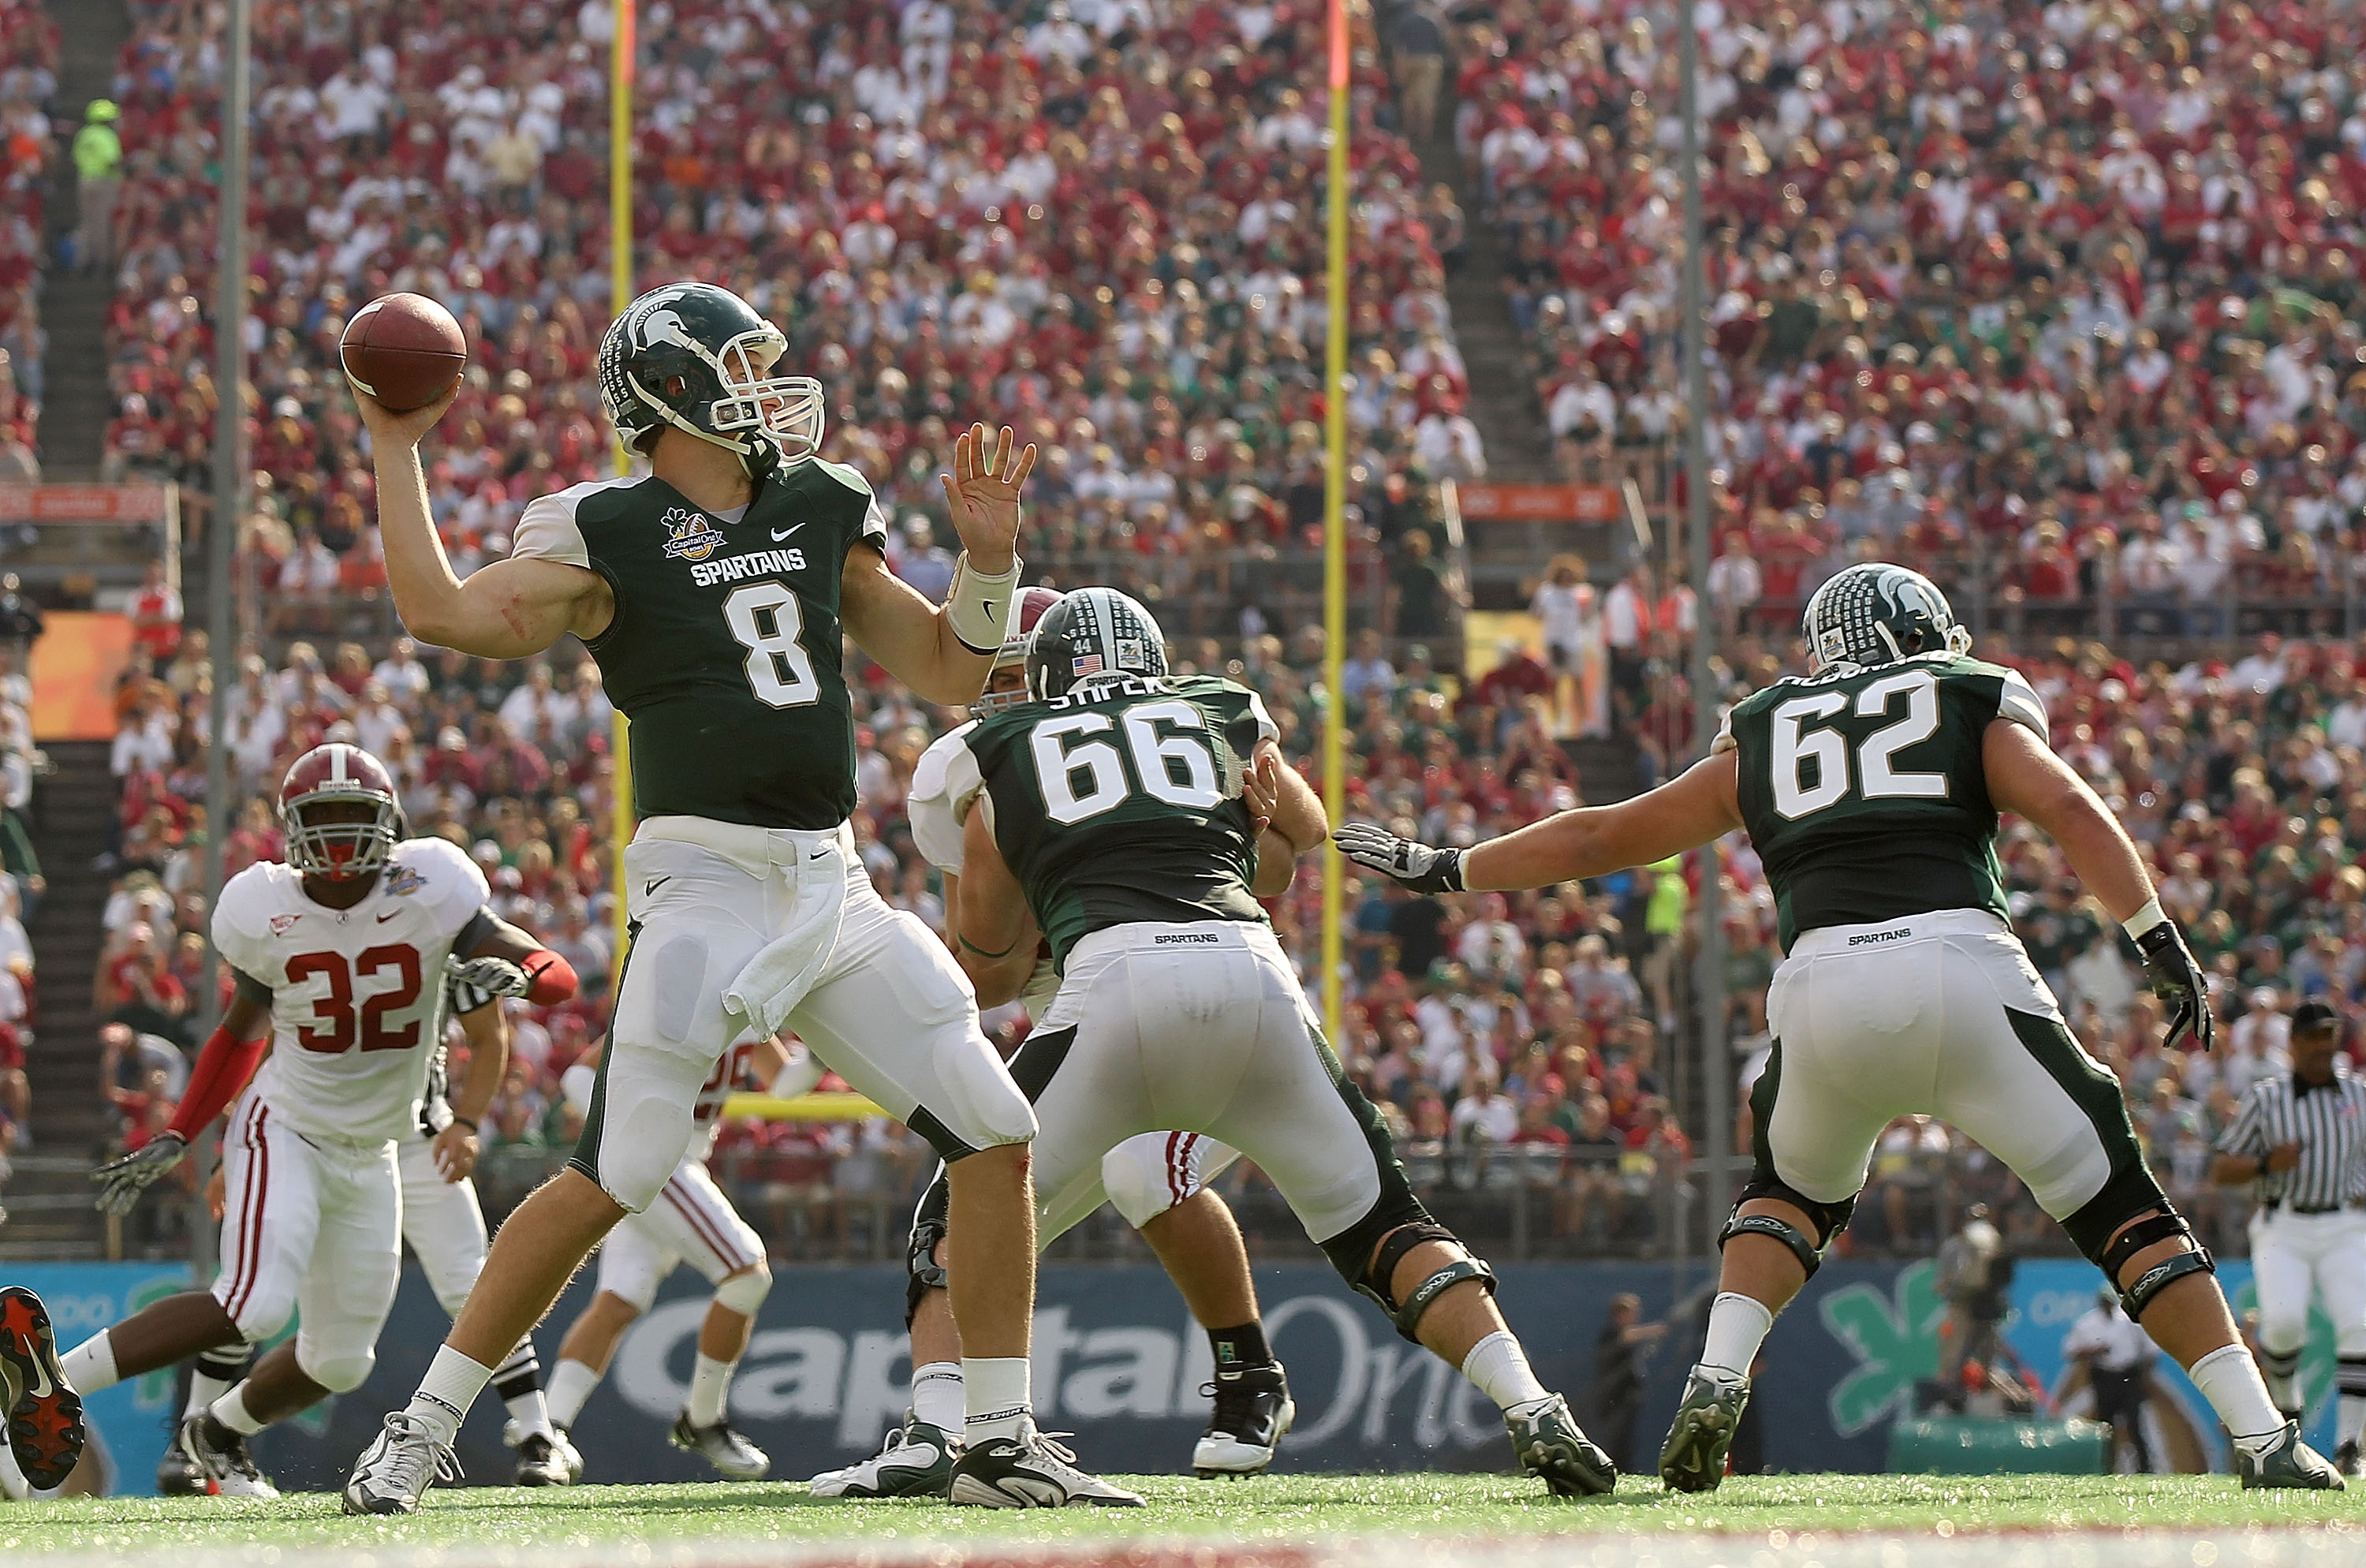 ORLANDO, FL - JANUARY 01:  Kirk Cousins #8 of the Michigan State Spartans passes the ball during the Capitol One Bowl against the Alabama Crimson Tide at the Florida Citrus Bowl on January 1, 2011 in Orlando, Florida.  (Photo by Mike Ehrmann/Getty Images)